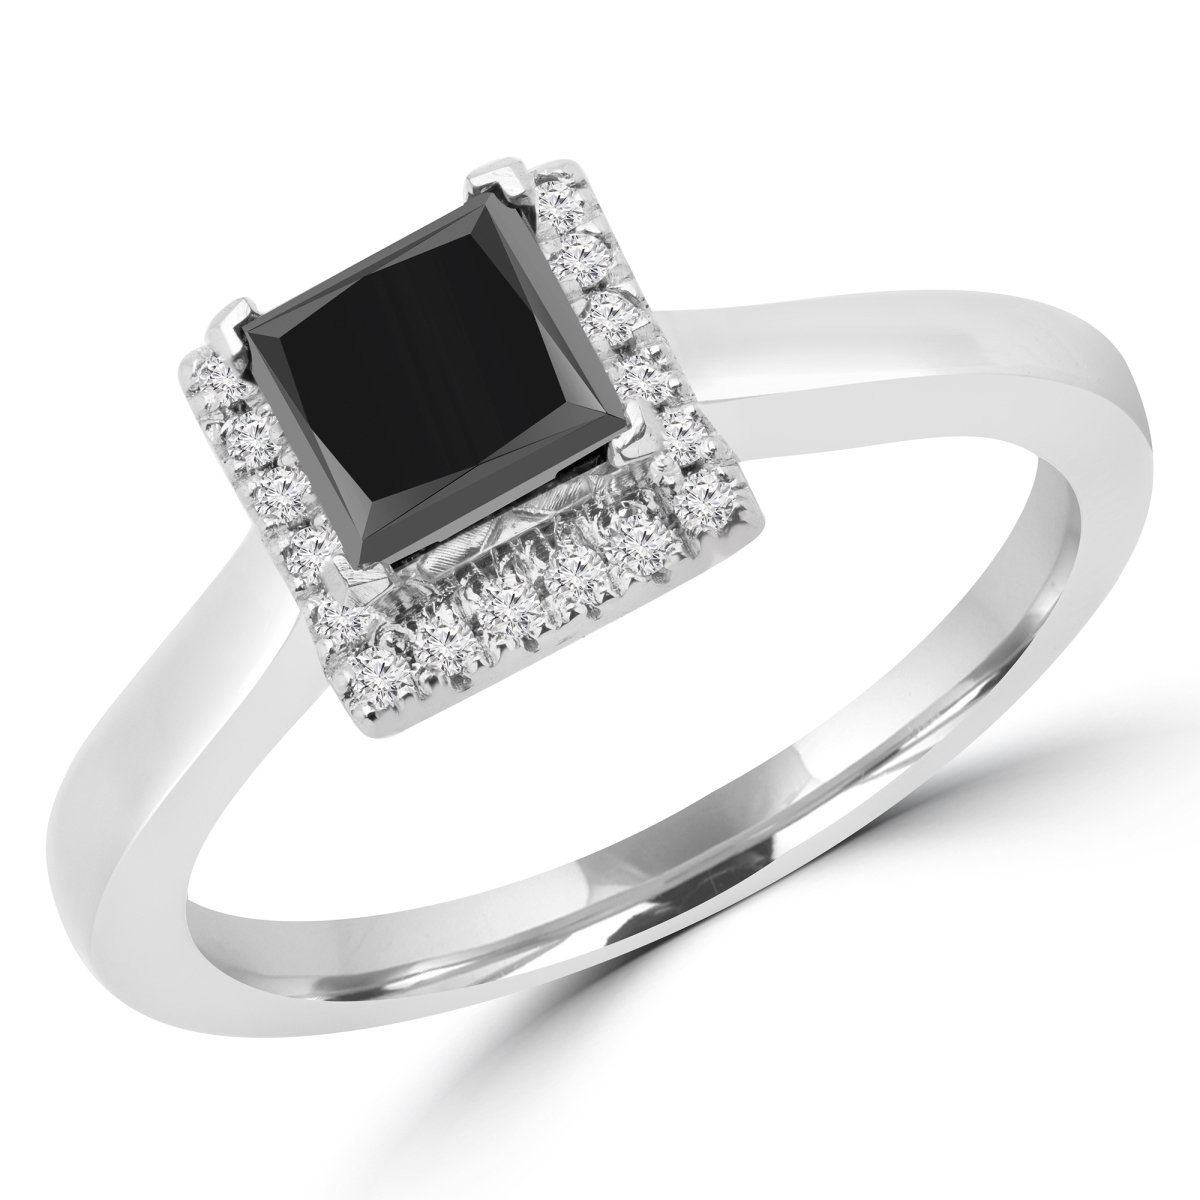 Picture of Majesty Diamonds MD170176 0.9 CTW Princess BlacK Diamond Halo Engagement Ring in 14K